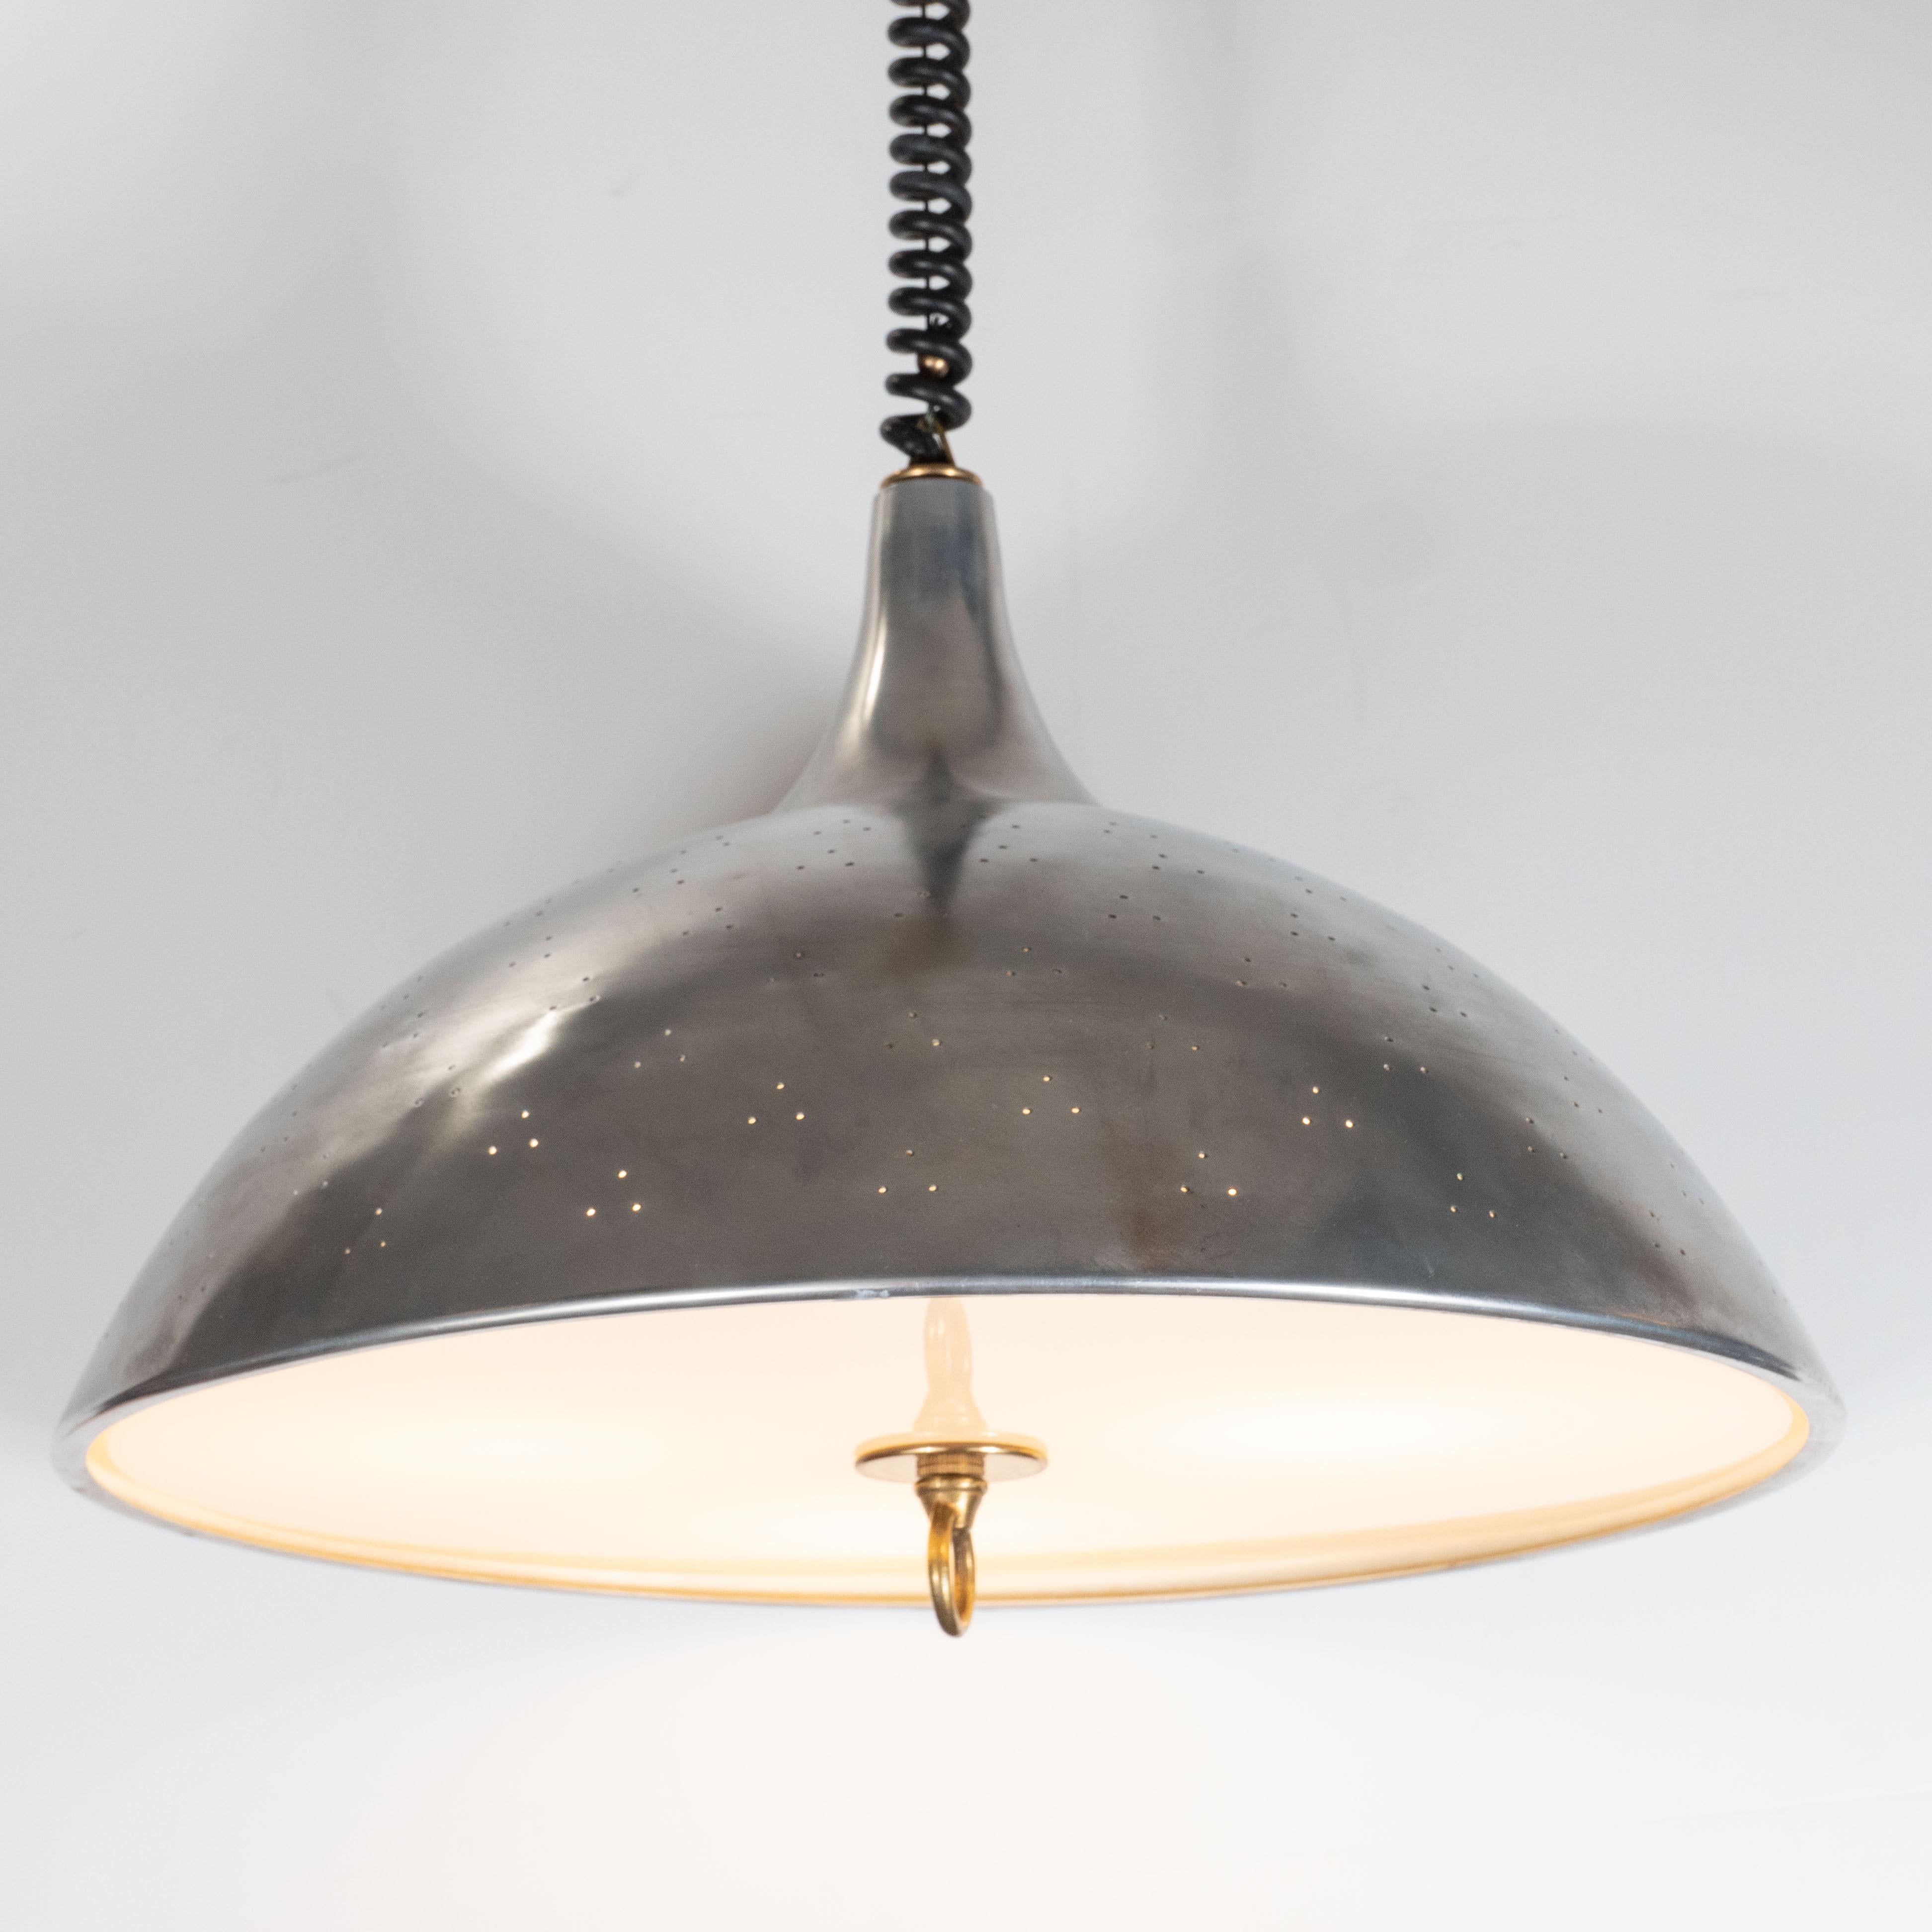 This elegant Mid-Century Modern chandelier was realized in Sweden, circa 1960. It features a domed body with an abundance of perforations presented in triangular sets of three. There is a Lucite shade fitted at the bottom of the fixture secured with